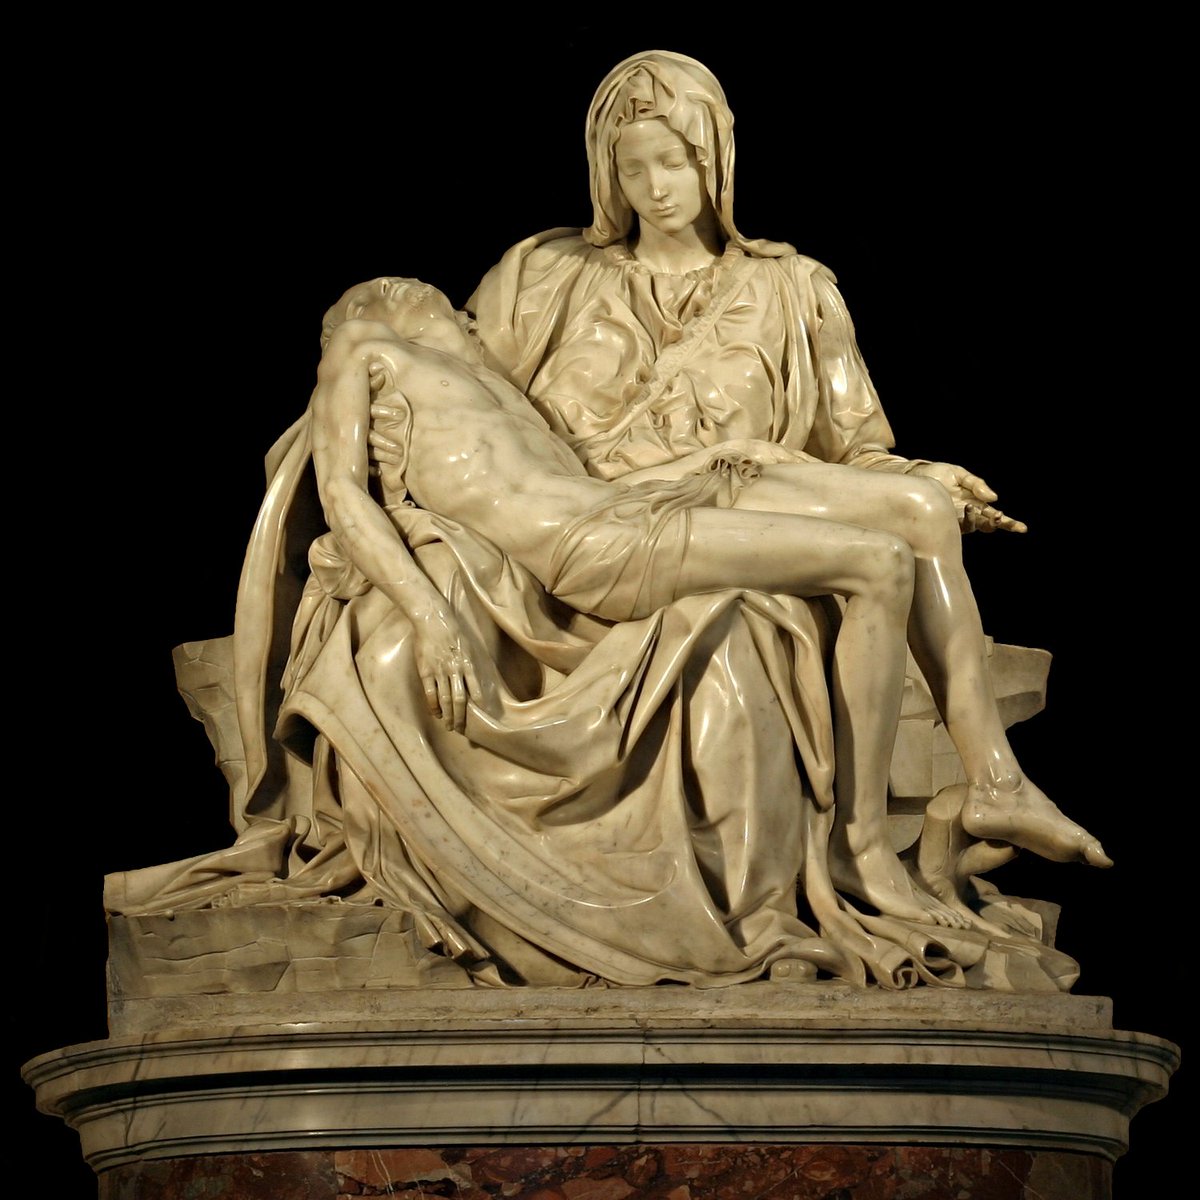 It's a reference to Pliny, but ALSO a nod to Michelangelo, who was the first since antiquity to use the verb this way on an artwork: here, on his Pieta (1499), emblazoned on the band across Mary's chest. Michelangelo would have DEFINITELY understood this as a challenge.